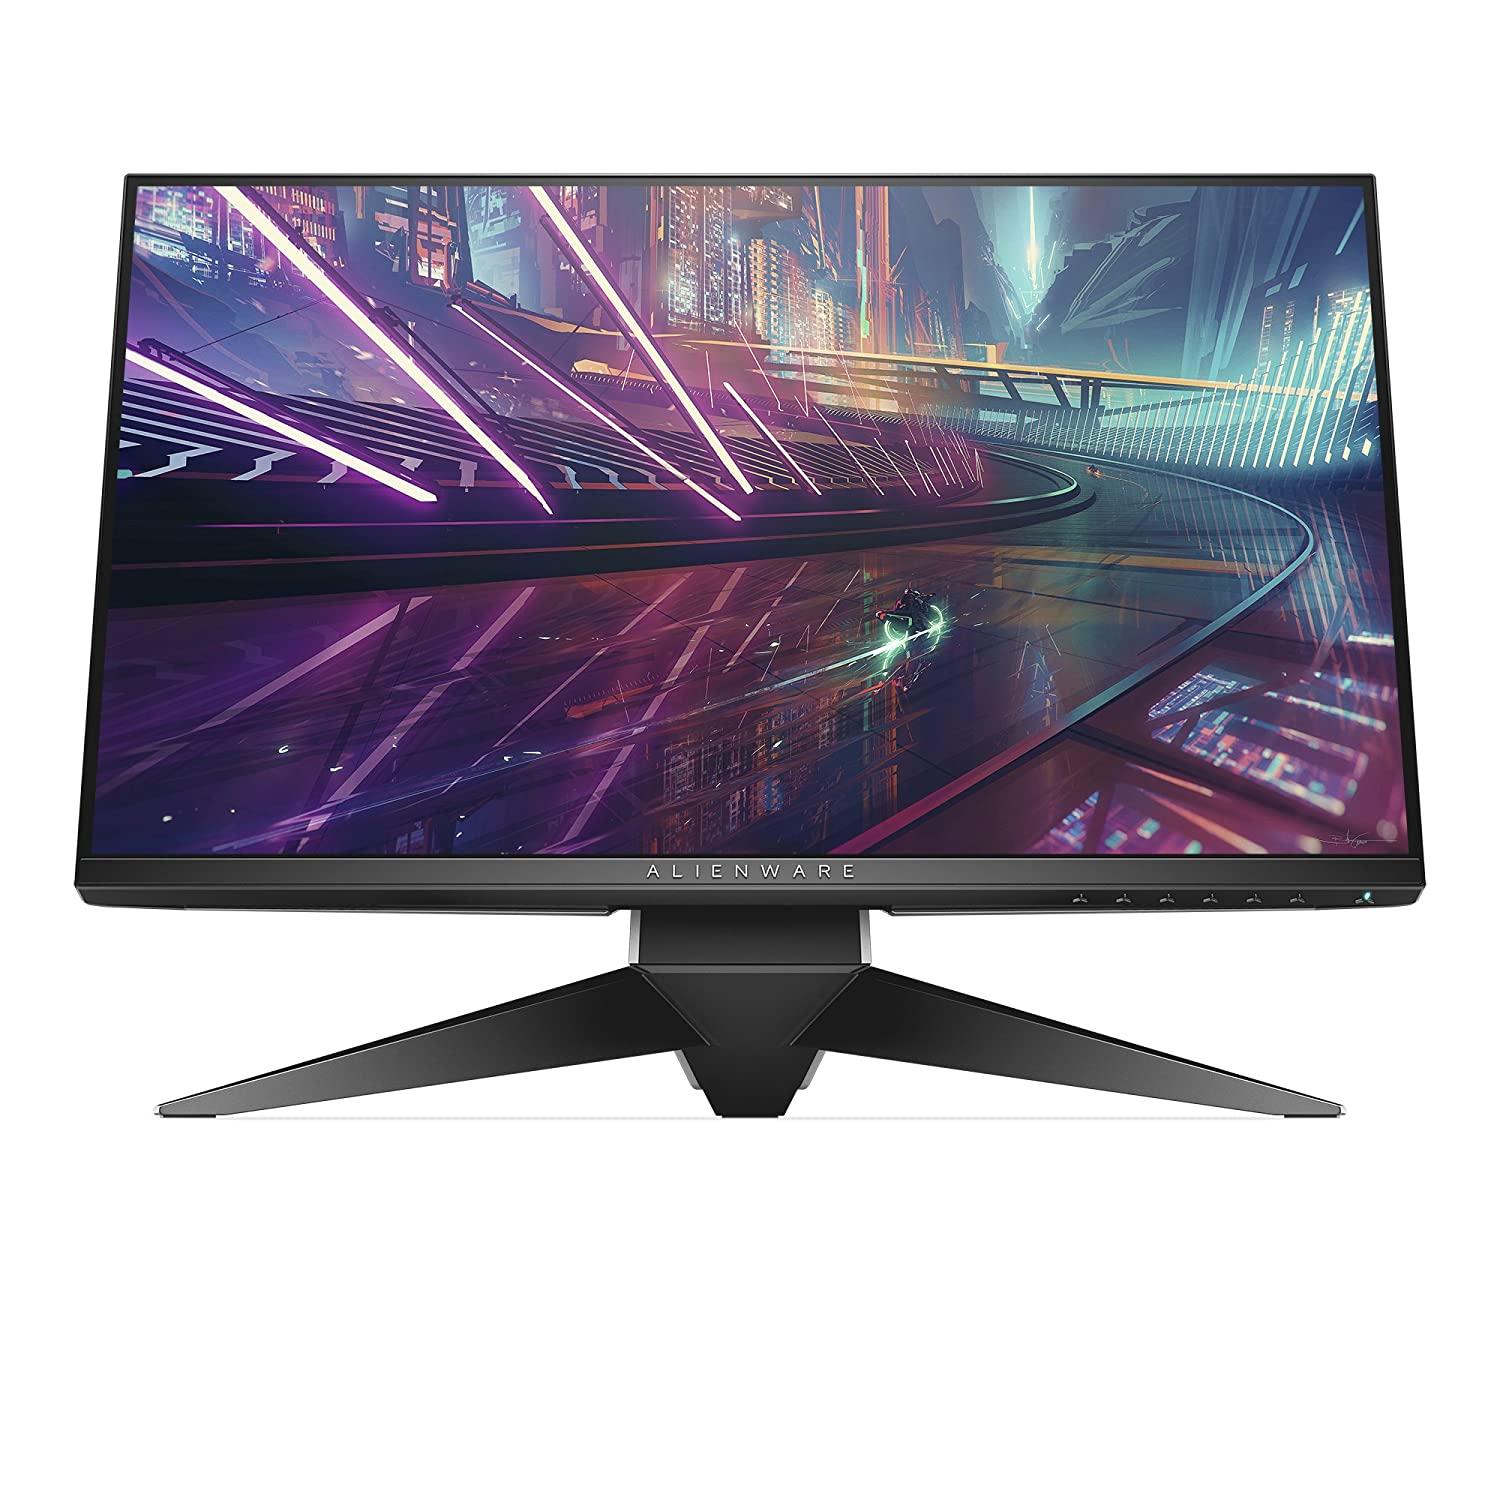 Amazon.in: Buy Dell Alienware 25 AW2518H Gaming Monitor Online at Low  Prices in India | Dell Reviews &amp;amp; Ratings